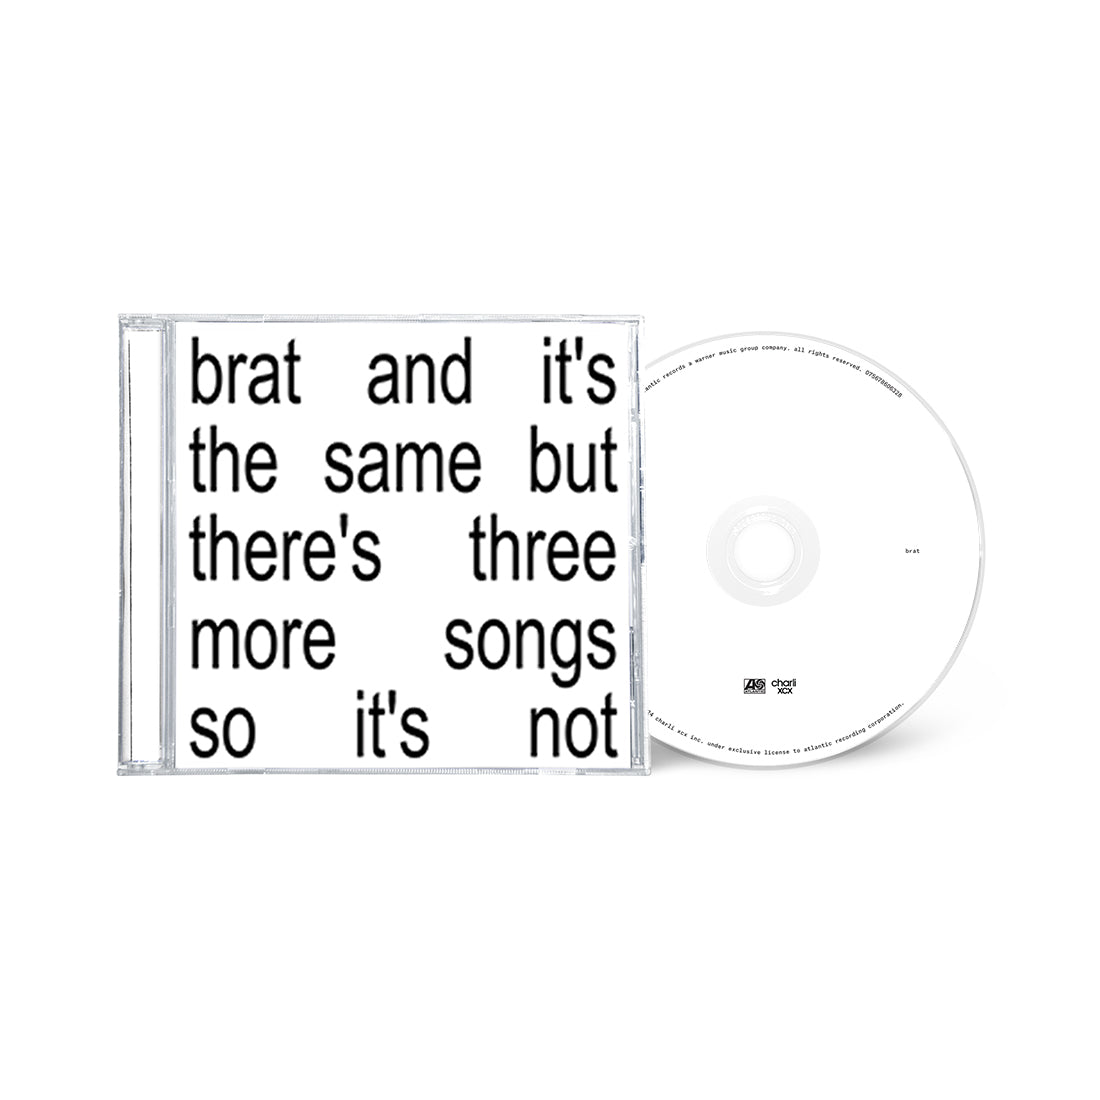 Brat and it’s the same but there’s three more songs so it’s not